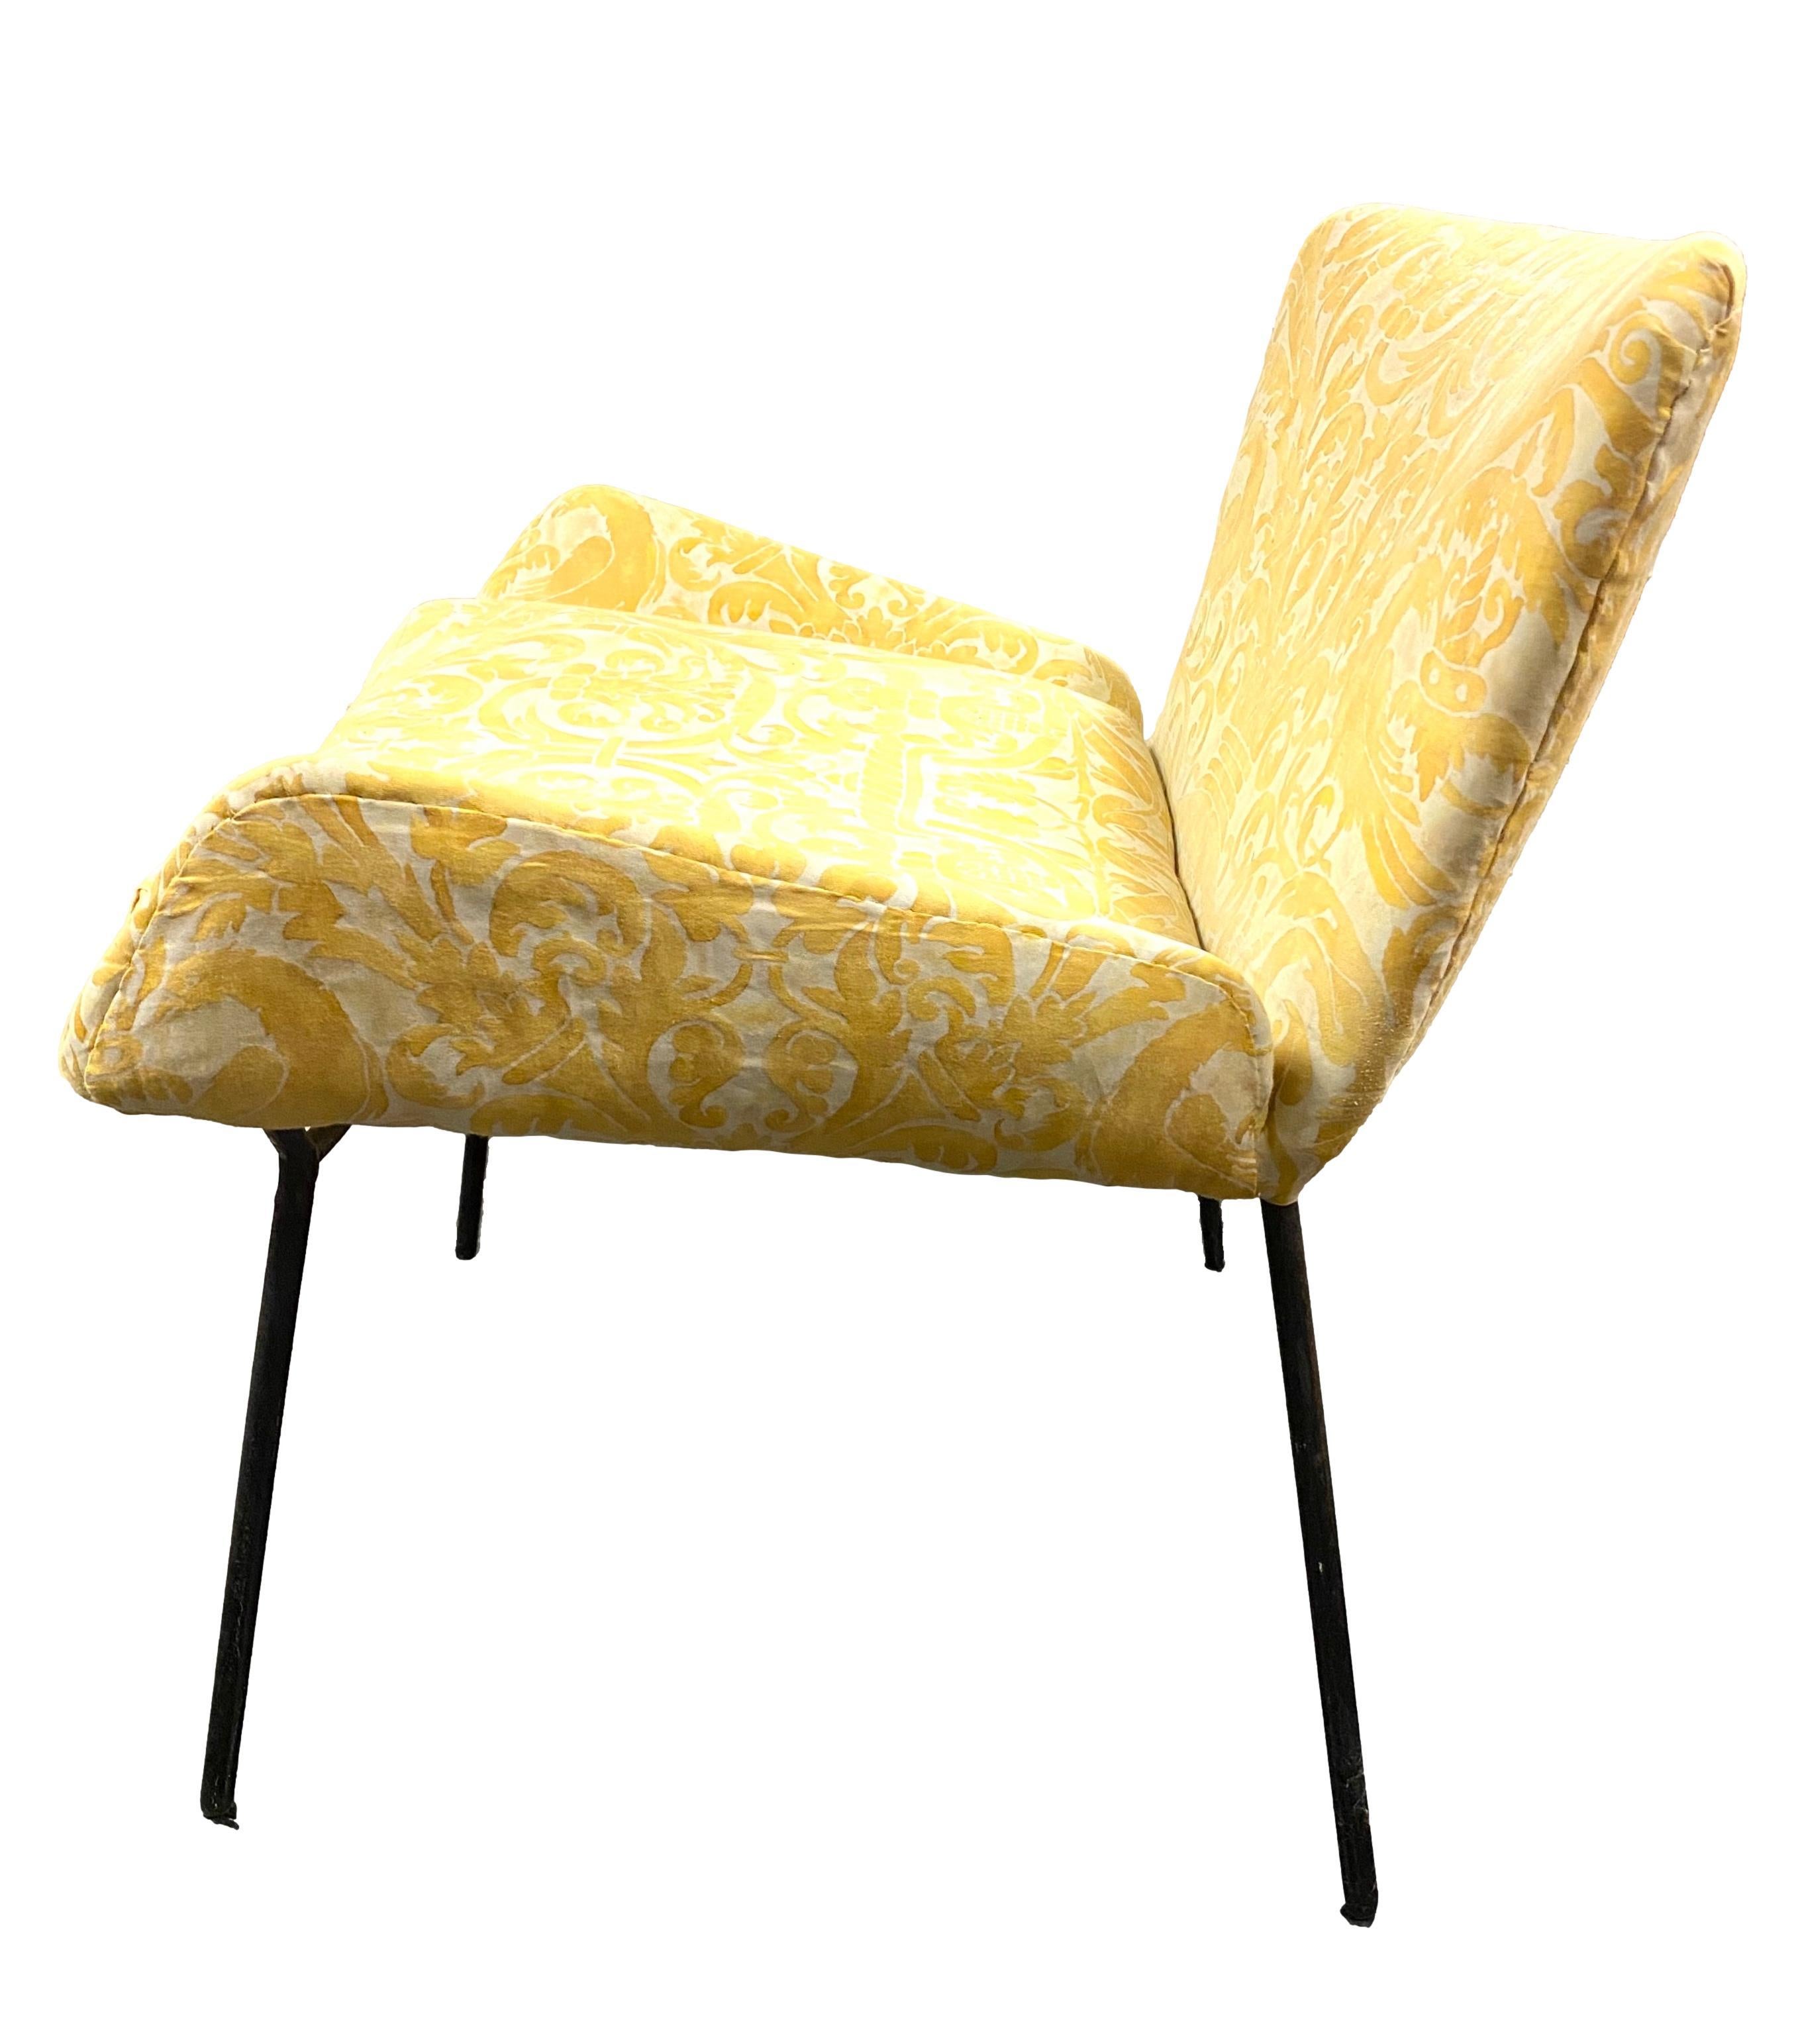 Mid-20th Century Italian Side Chair with Fortuny Upholstery For Sale